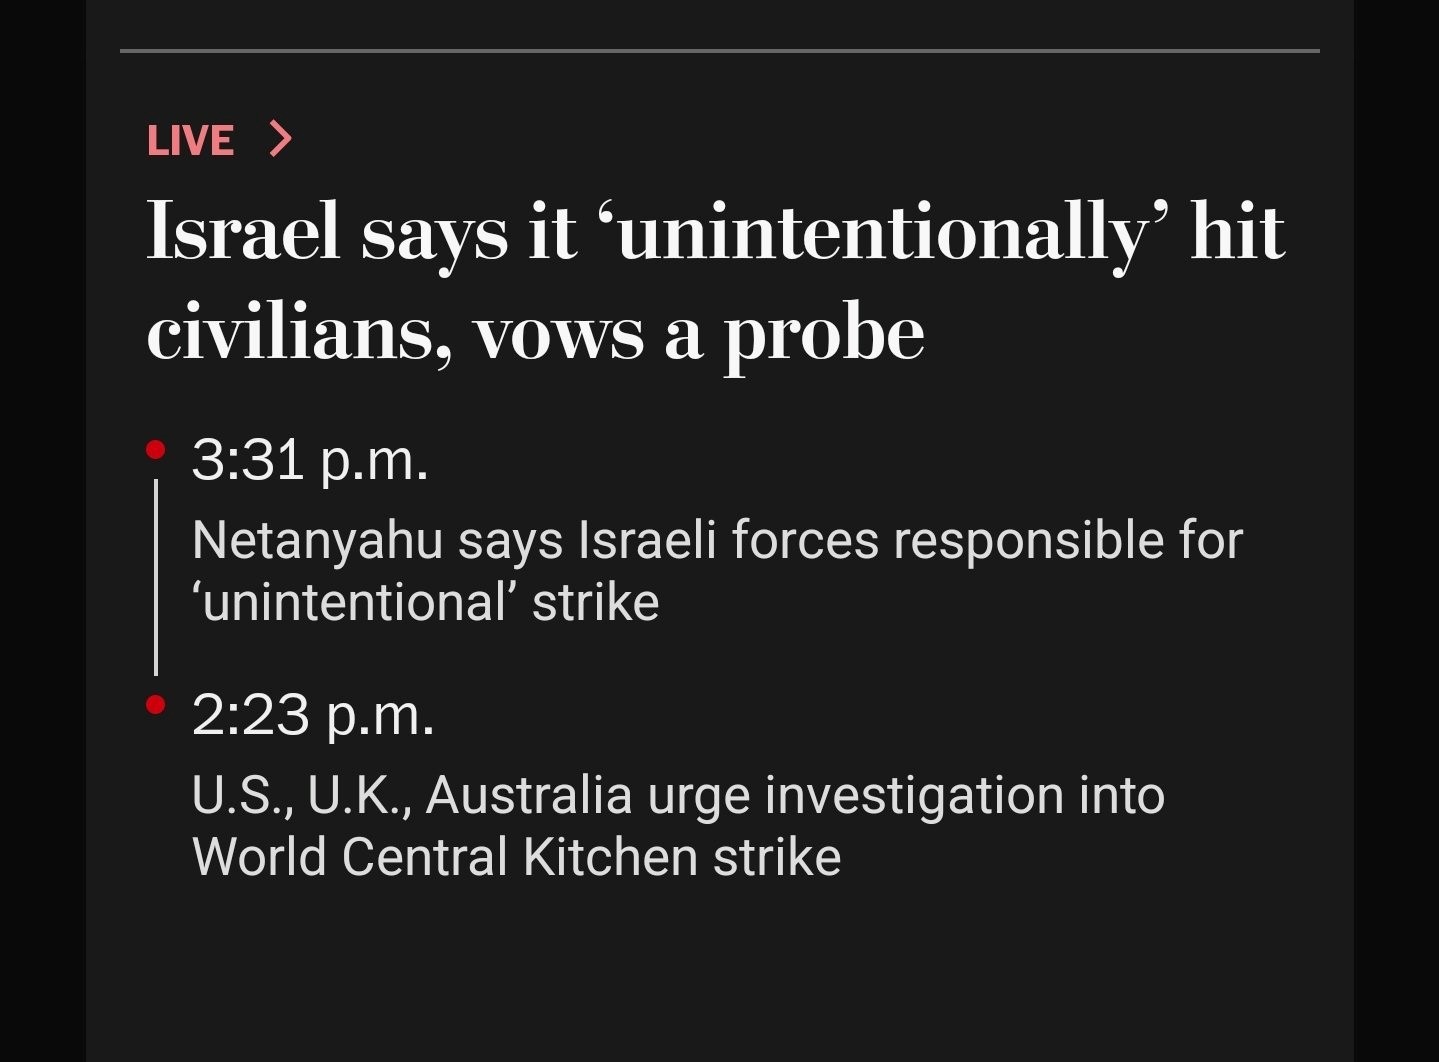 Washington Post News on WCK Israeli airstrike the killed 7 of it's foreign aidworkers